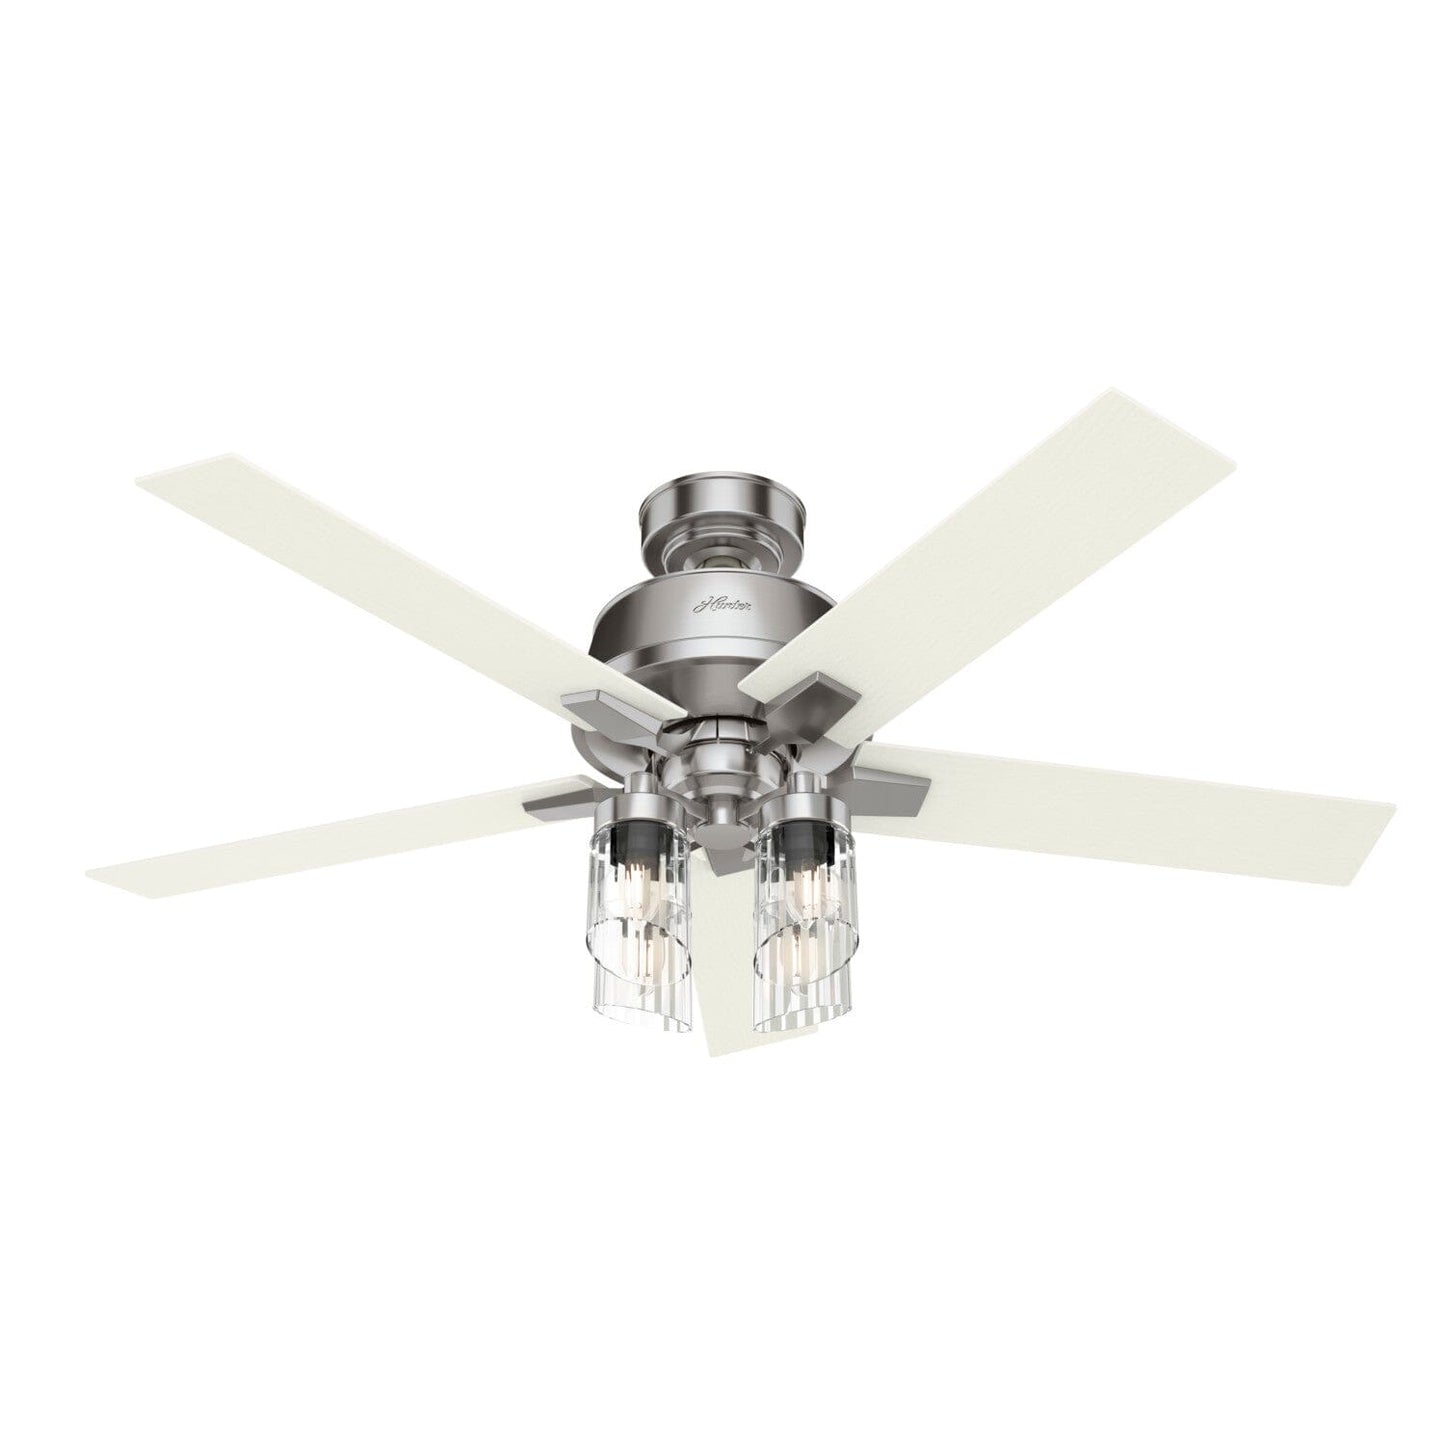 52 inch Crystalline with LED Ceiling Fans Hunter Brushed Nickel - White Grain 